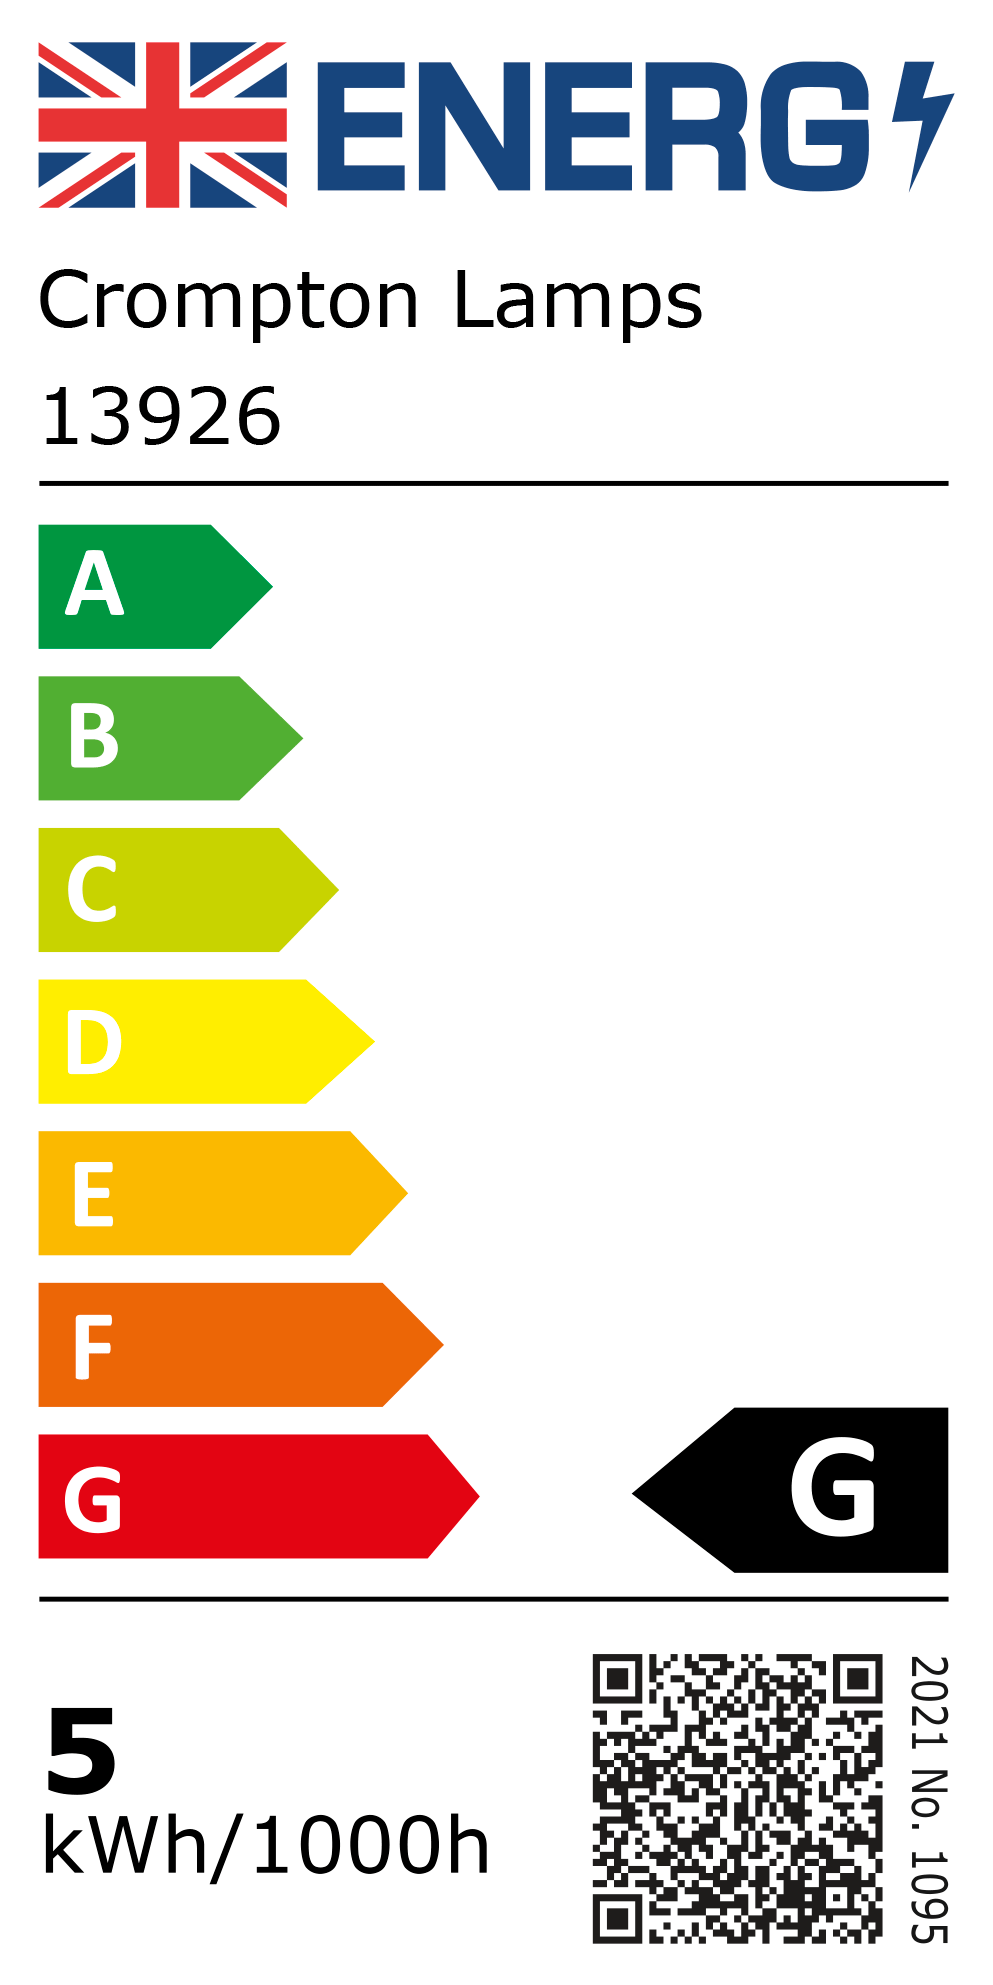 New 2021 Energy Rating Label: Stock Code 13926